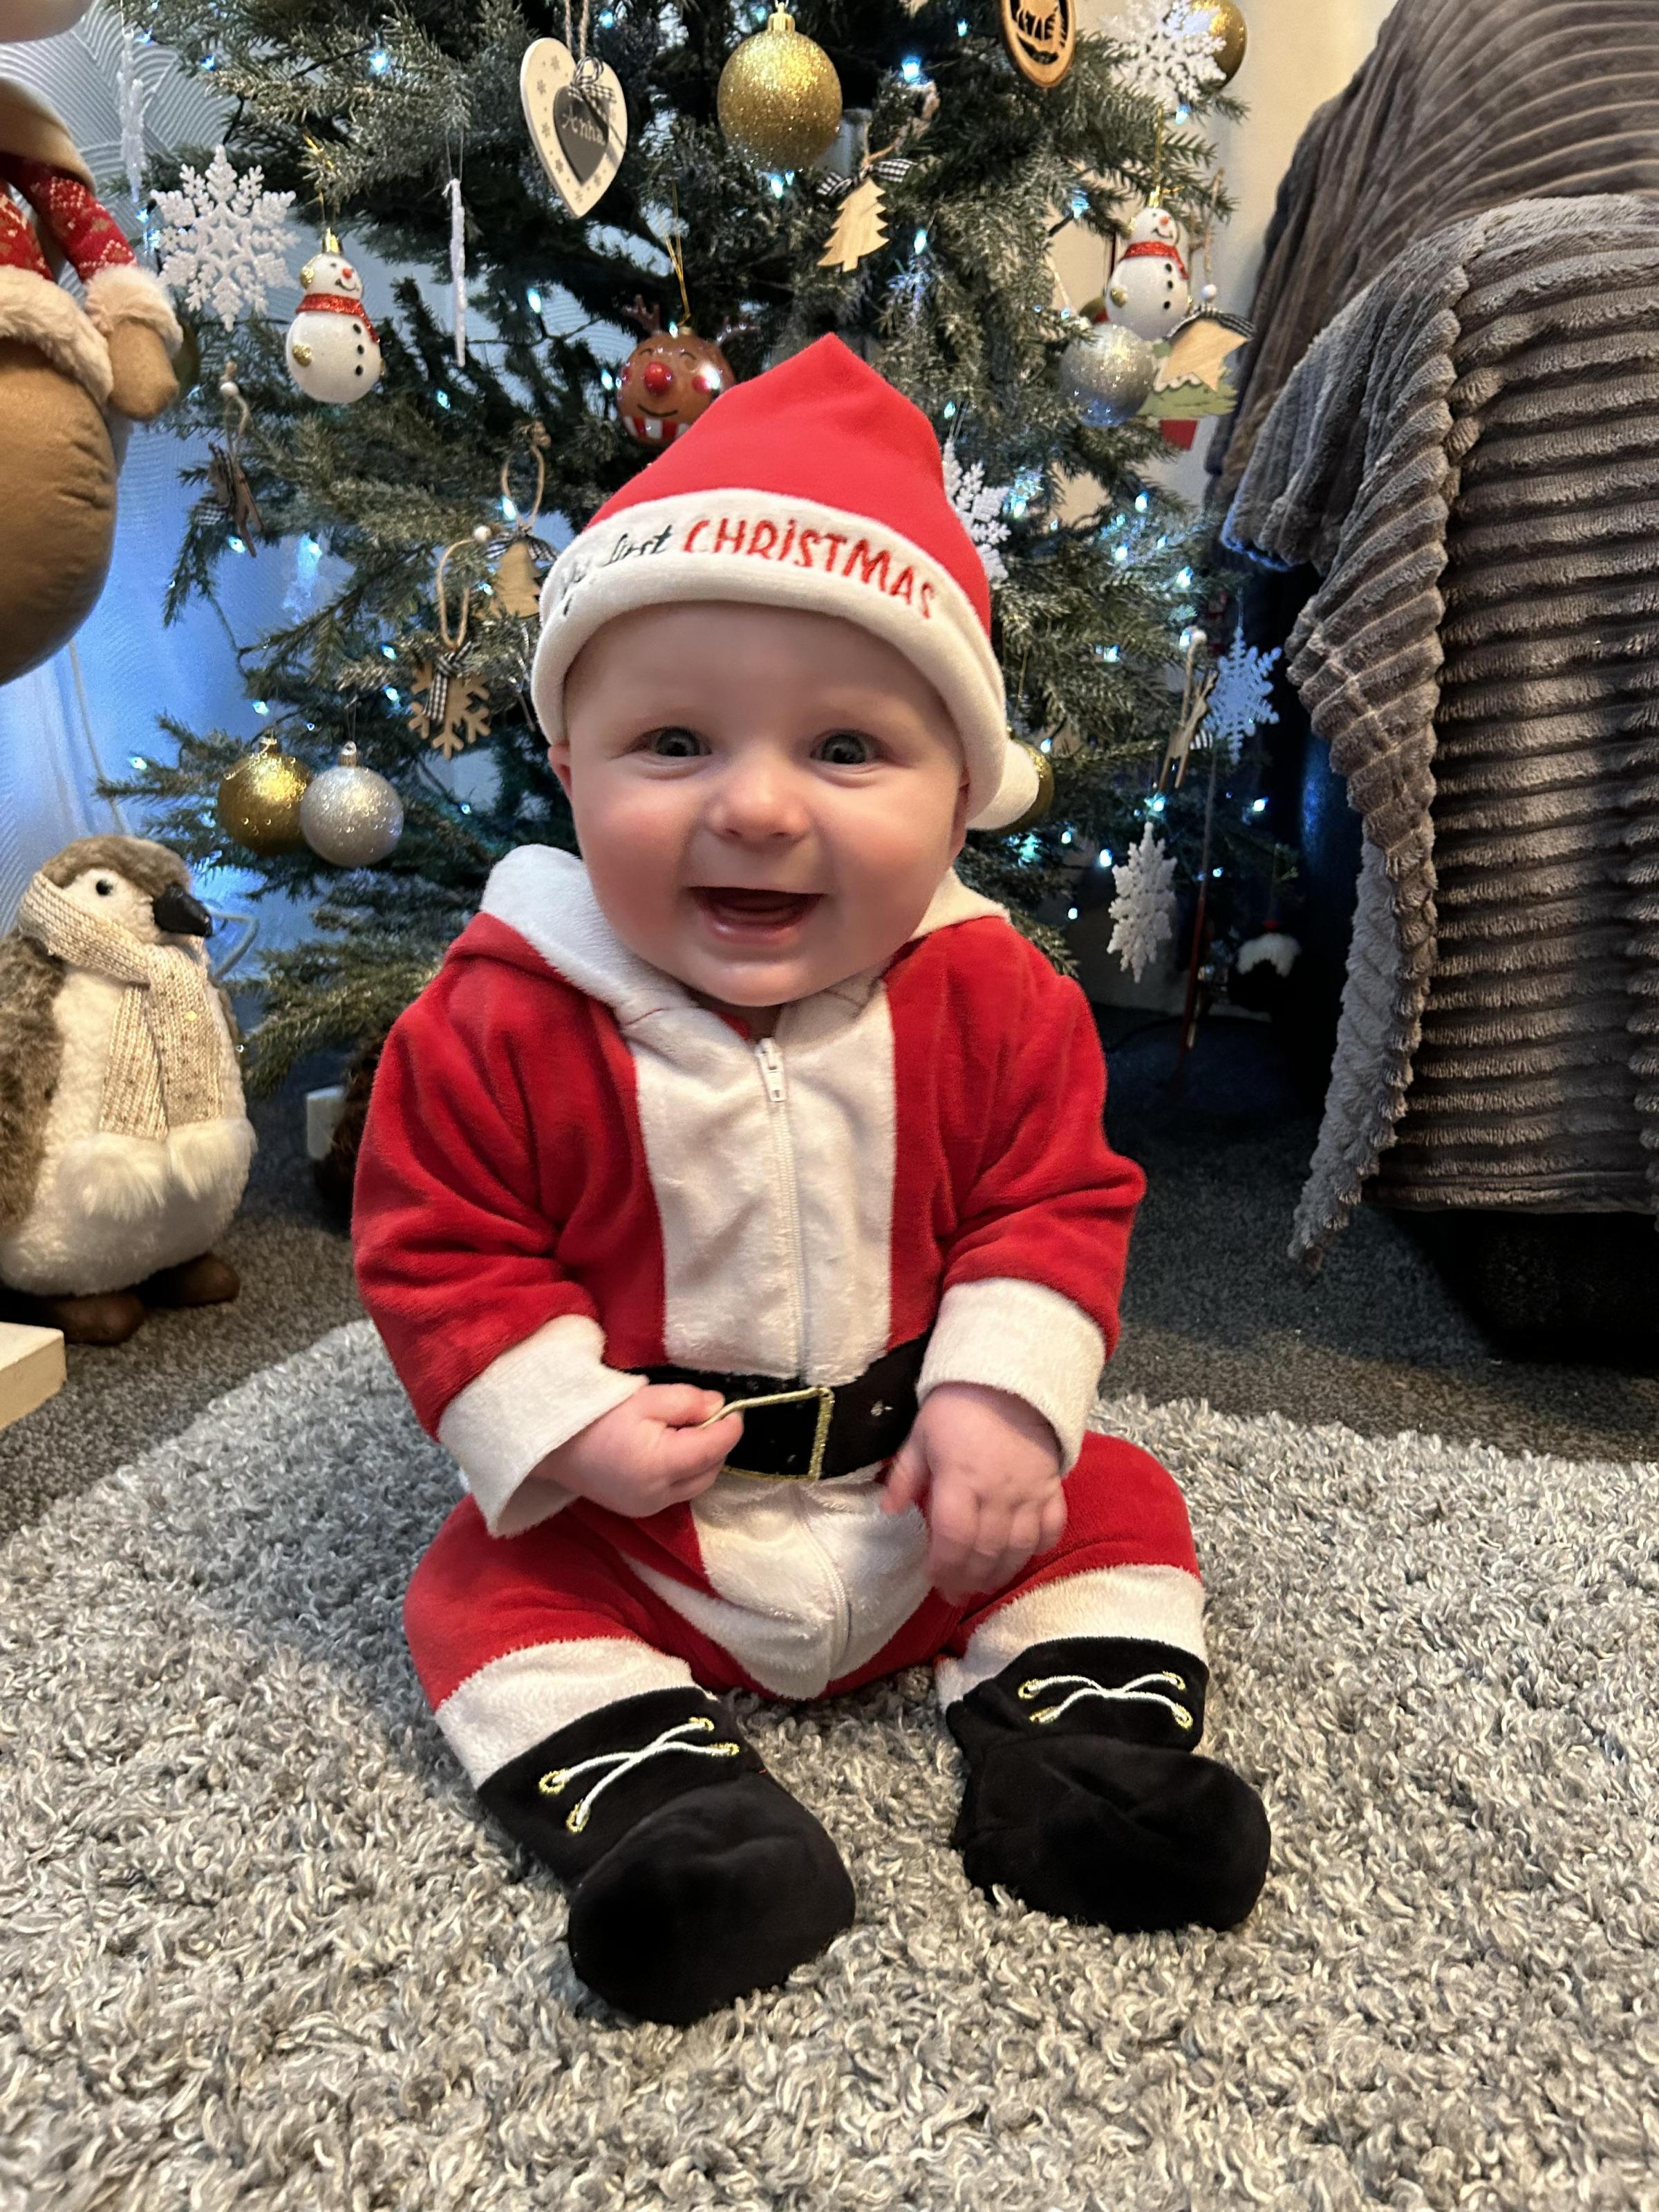 Anna Jones, from Buckley: Six-month-old Luca was very excited to see all the pretty lights on the Christmas tree.